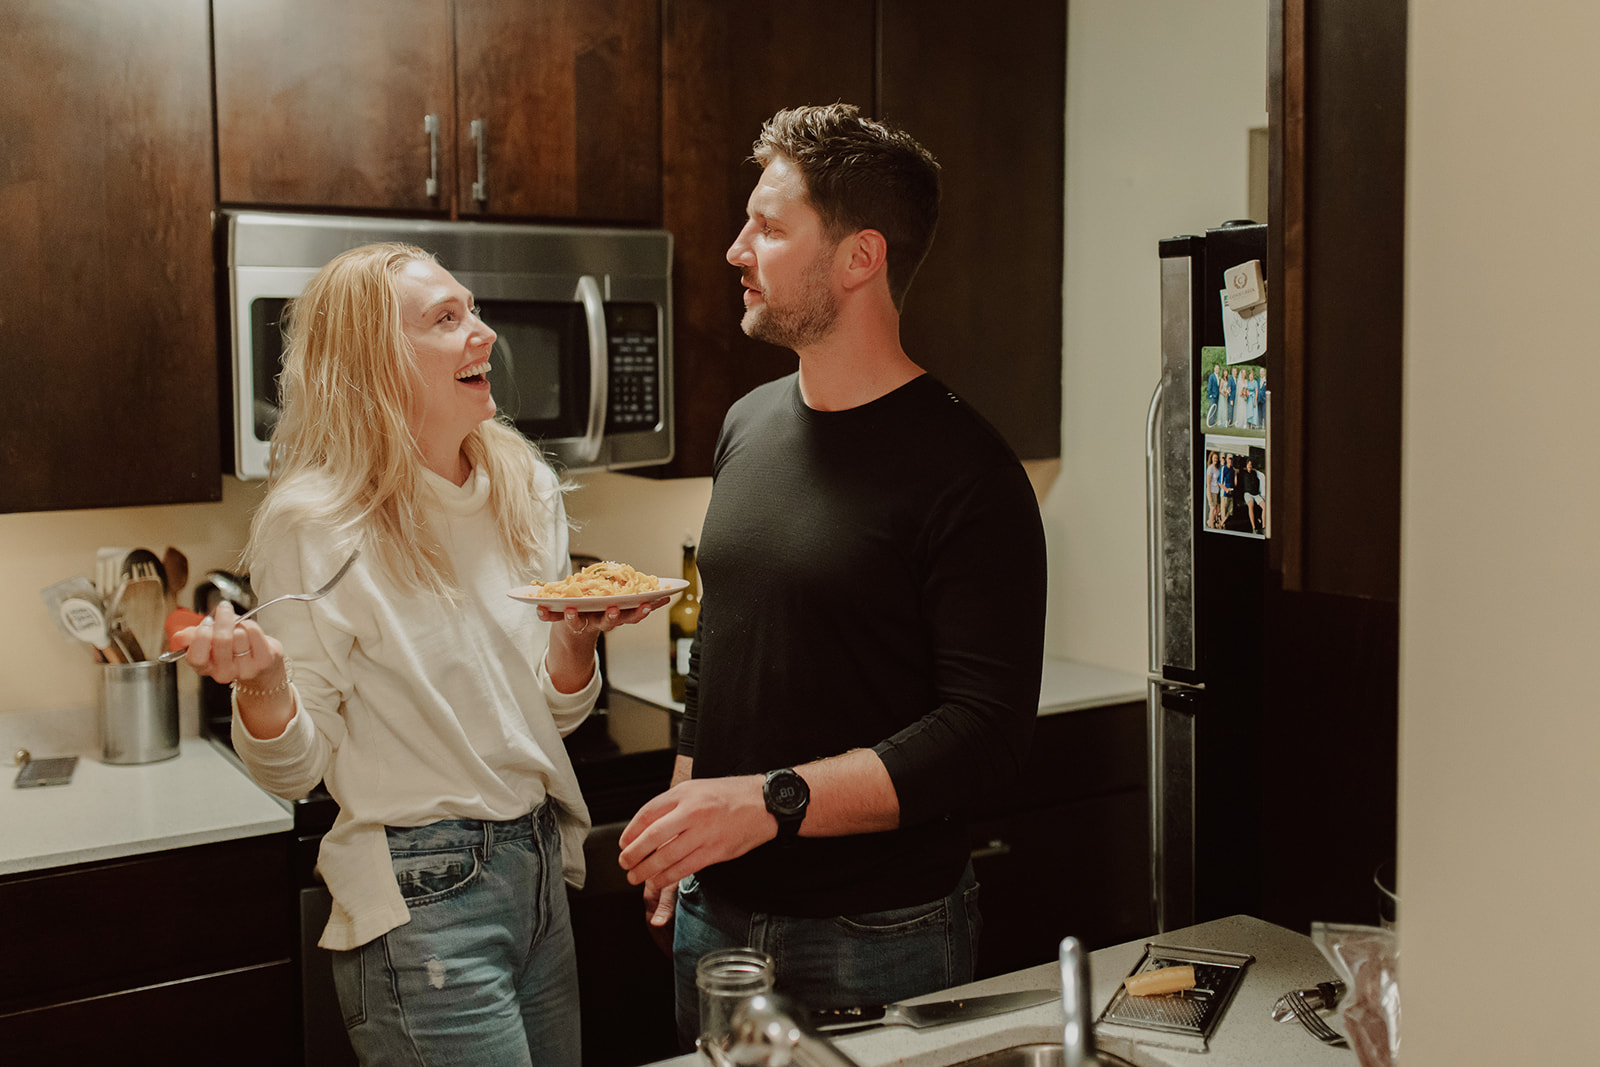 minneapolis documentary engagement photos cooking at home